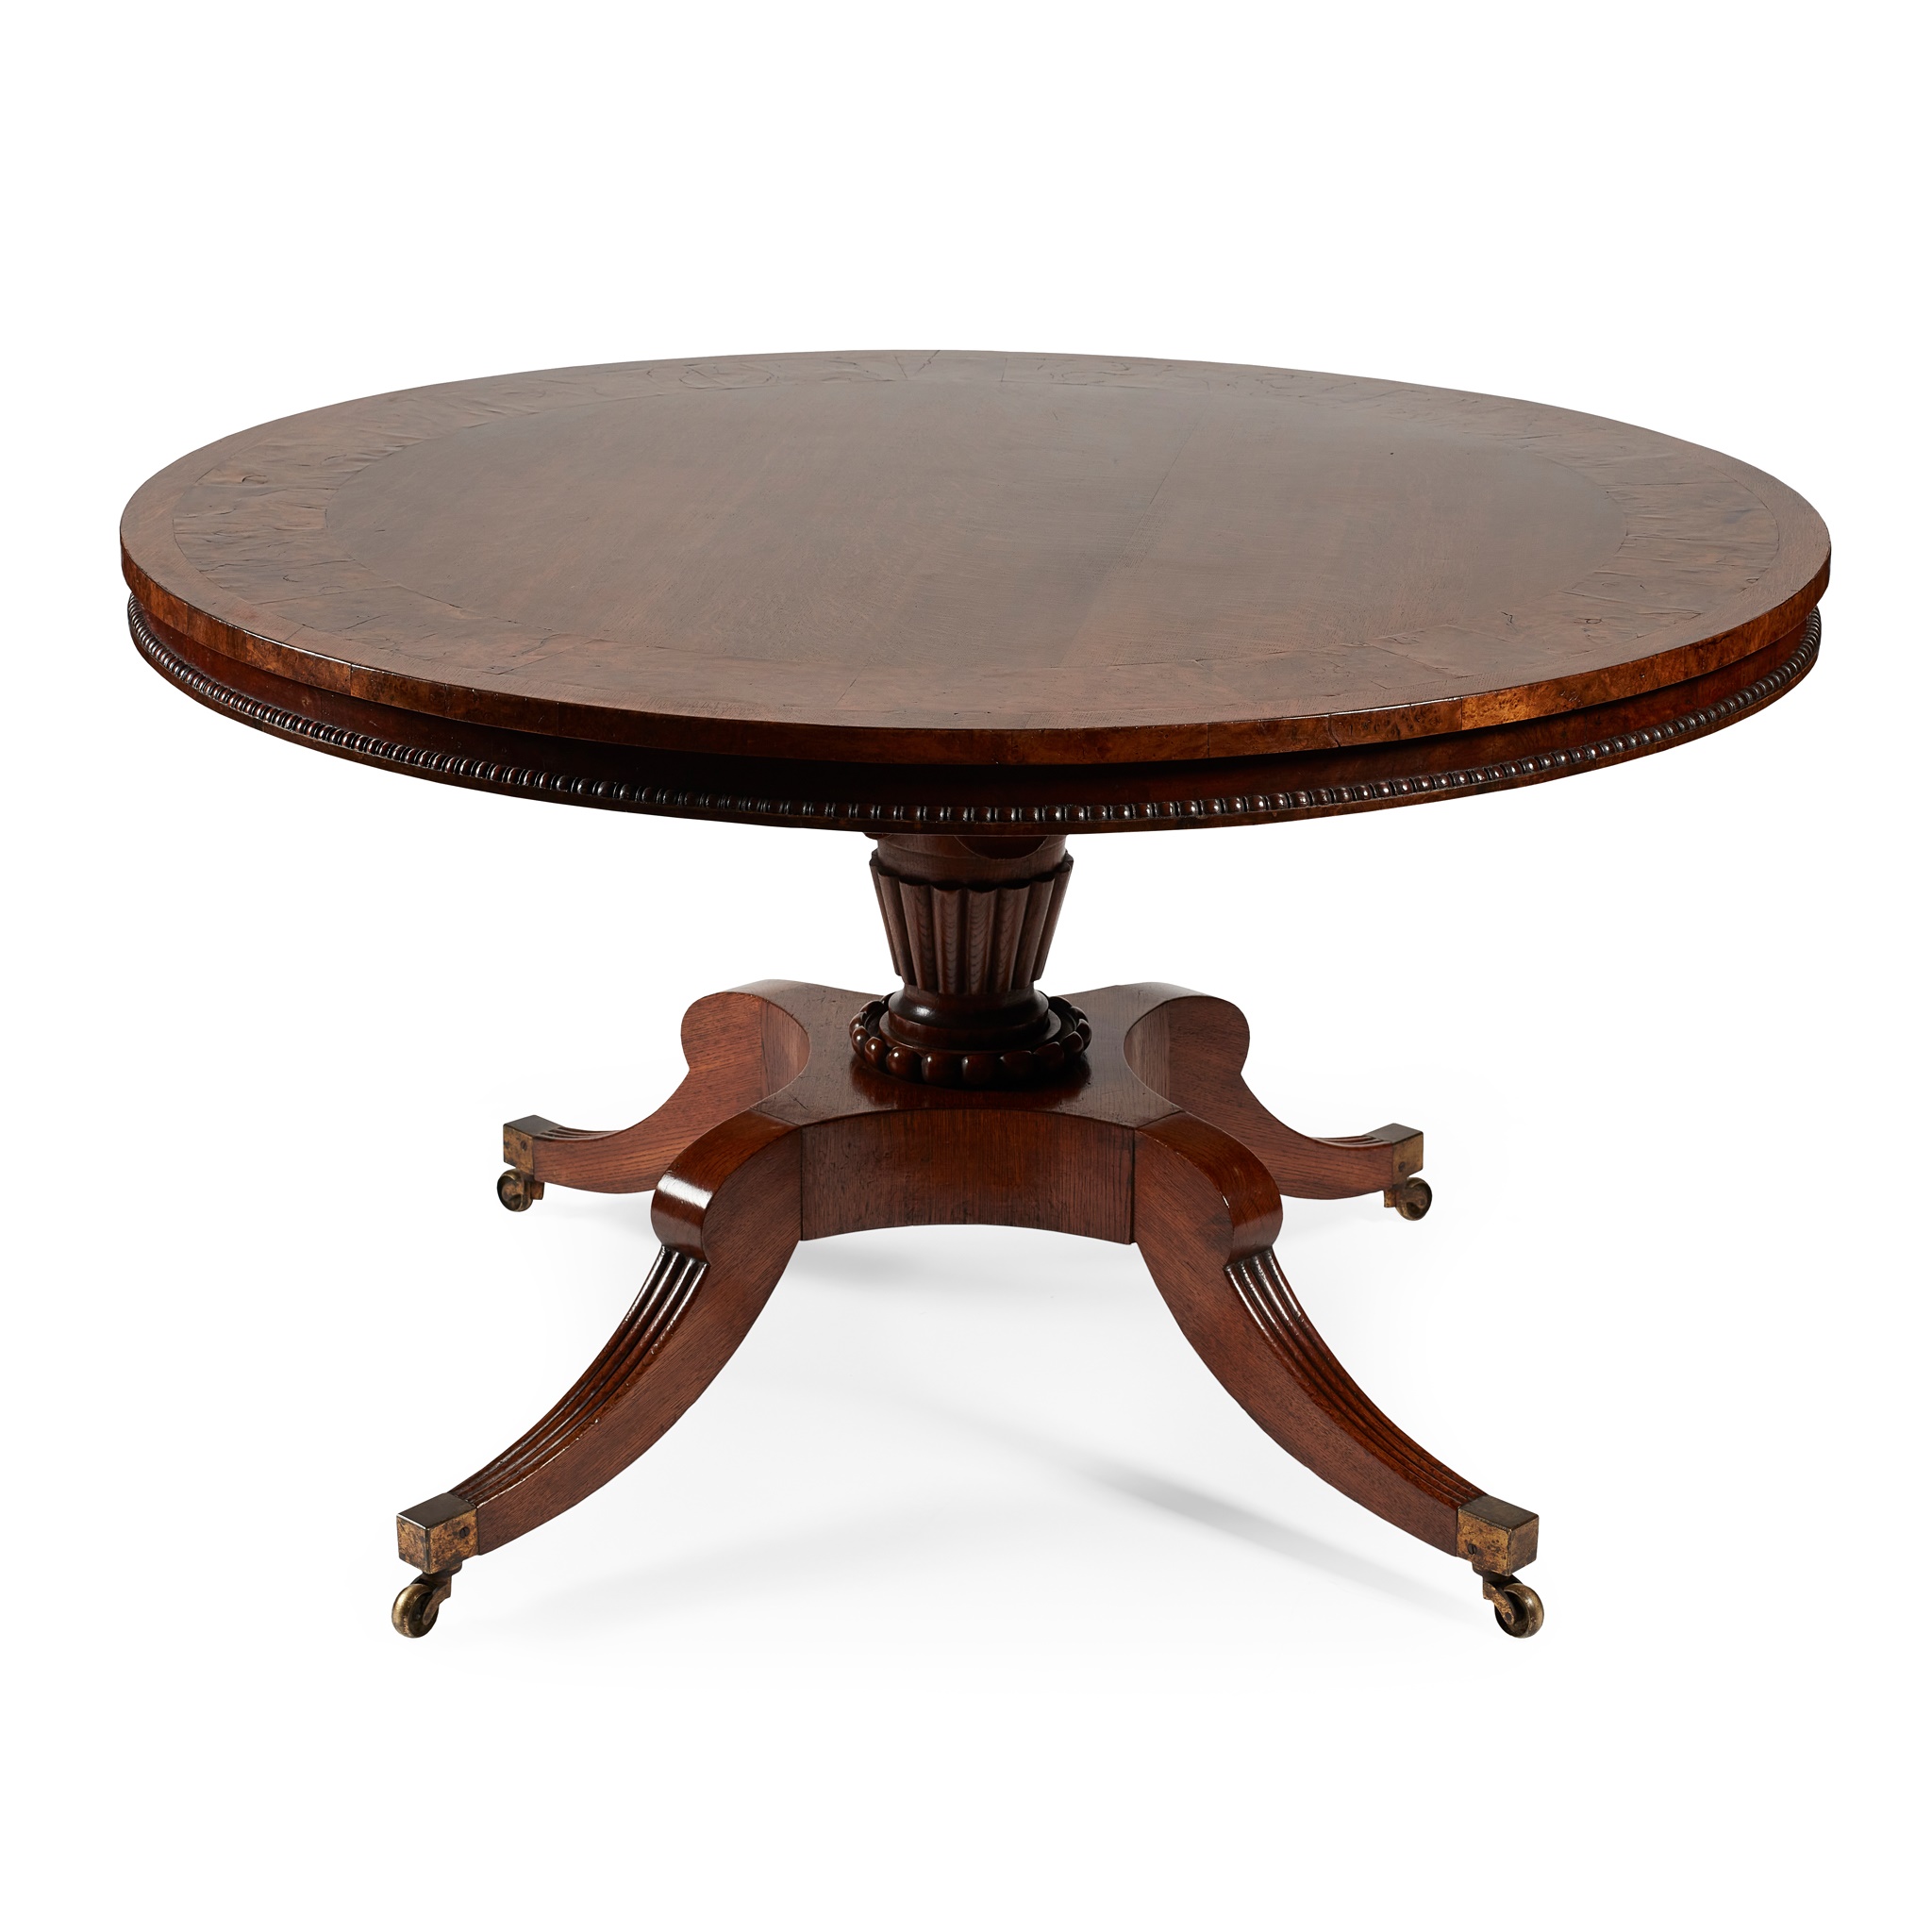 A SCOTTISH REGENCY OAK CENTRE TABLE, ATTRIBUTED TO WILLIAM TROTTER, EDINBURGH EARLY 19TH CENTURY - Image 2 of 2